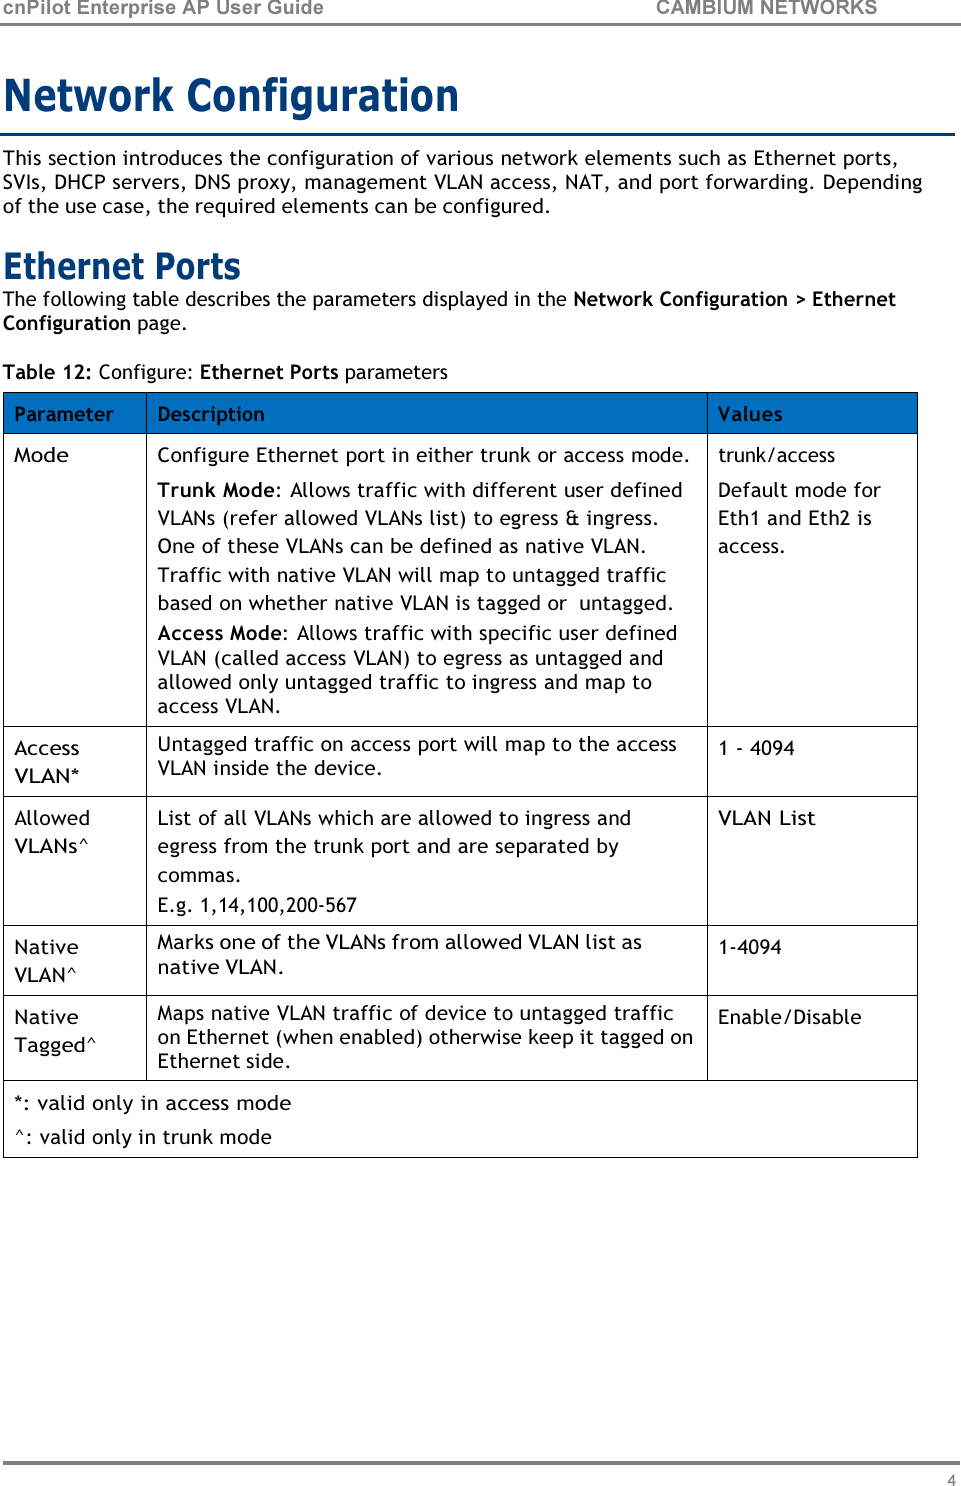 45 cnPilot Enterprise AP User Guide CAMBIUM NETWORKS    Network Configuration  This section introduces the configuration of various network elements such as Ethernet ports, SVIs, DHCP servers, DNS proxy, management VLAN access, NAT, and port forwarding. Depending of the use case, the required elements can be configured.  Ethernet Ports The following table describes the parameters displayed in the Network Configuration &gt; Ethernet Configuration page.  Table 12: Configure: Ethernet Ports parameters  Parameter  Description Values Mode Configure Ethernet port in either trunk or access mode. Trunk Mode: Allows traffic with different user defined VLANs (refer allowed VLANs list) to egress &amp; ingress. One of these VLANs can be defined as native VLAN. Traffic with native VLAN will map to untagged traffic based on whether native VLAN is tagged or  untagged. Access Mode: Allows traffic with specific user defined VLAN (called access VLAN) to egress as untagged and allowed only untagged traffic to ingress and map to access VLAN. trunk/access Default mode for Eth1 and Eth2 is access. Access VLAN* Untagged traffic on access port will map to the access VLAN inside the device. 1 - 4094 Allowed VLANs^ List of all VLANs which are allowed to ingress and egress from the trunk port and are separated by commas. E.g. 1,14,100,200-567 VLAN List Native VLAN^ Marks one of the VLANs from allowed VLAN list as native VLAN. 1-4094 Native Tagged^ Maps native VLAN traffic of device to untagged traffic on Ethernet (when enabled) otherwise keep it tagged on Ethernet side. Enable/Disable *: valid only in access mode ^: valid only in trunk mode 